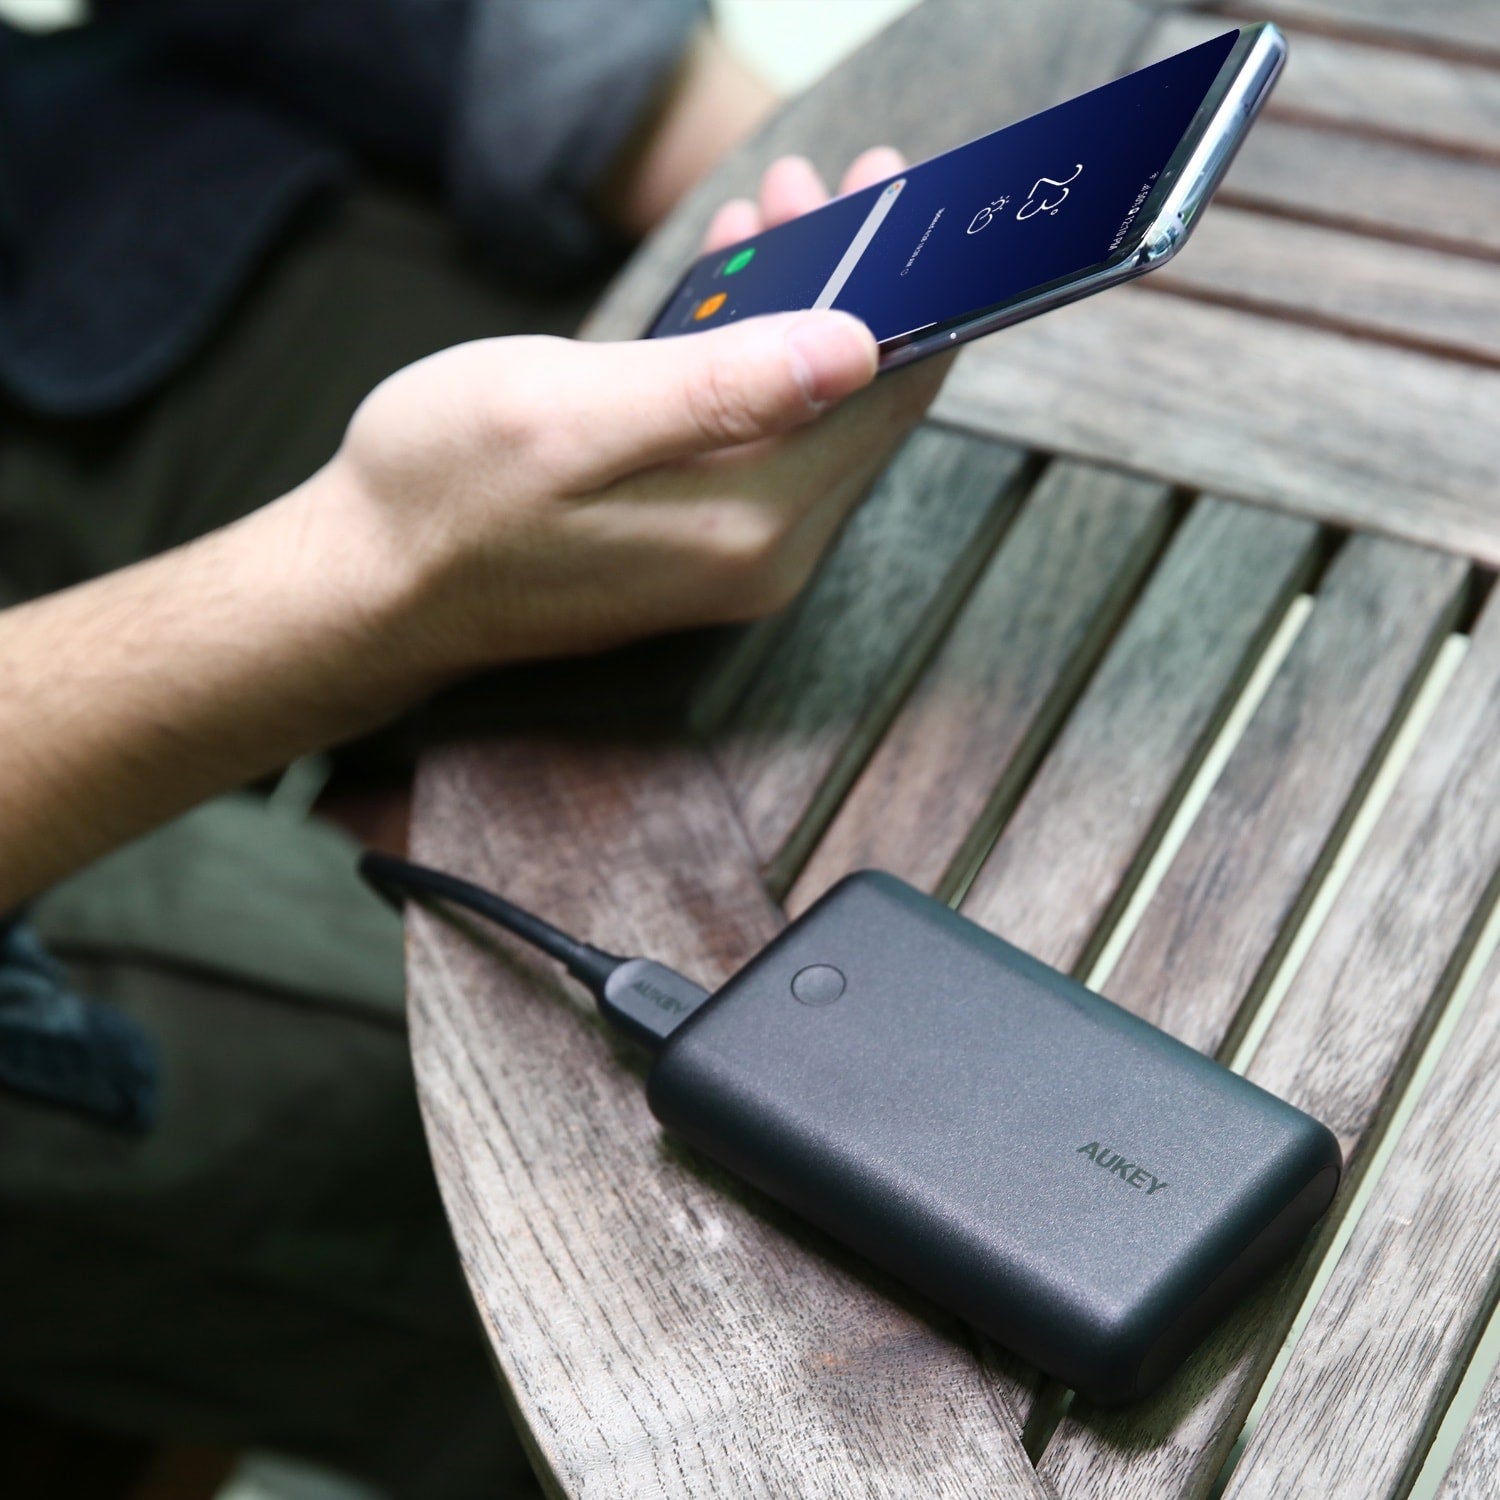 AUKEY PB-XD10 10050mAh Power Delivery 2.0 USB C Power Bank With Quick Charge 3.0 - Aukey Malaysia Official Store